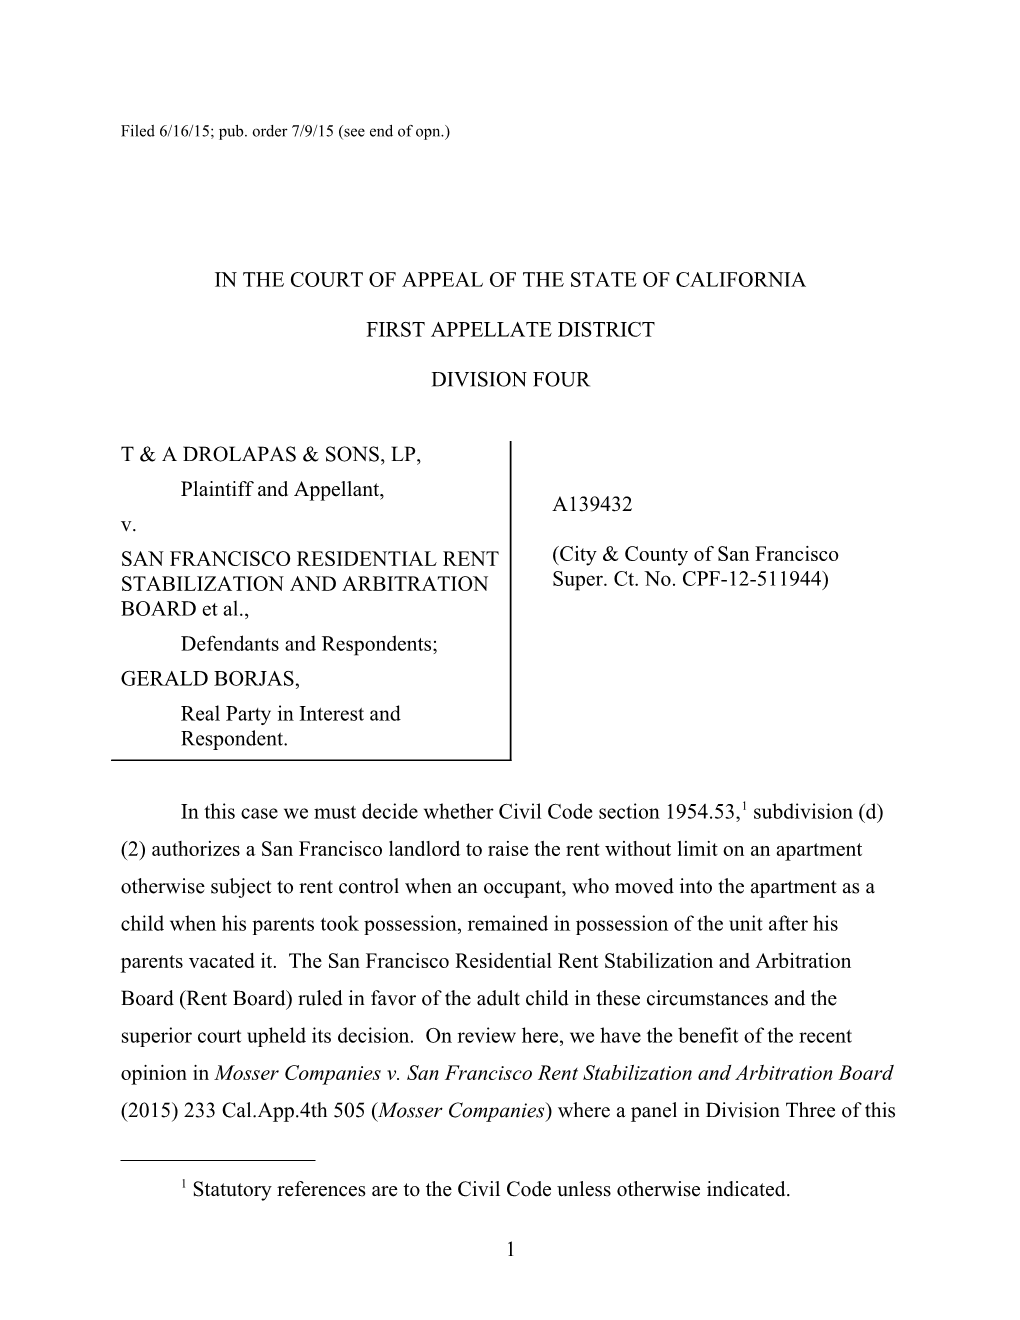 Filed 6/16/15; Pub. Order 7/9/15 (See End of Opn.)